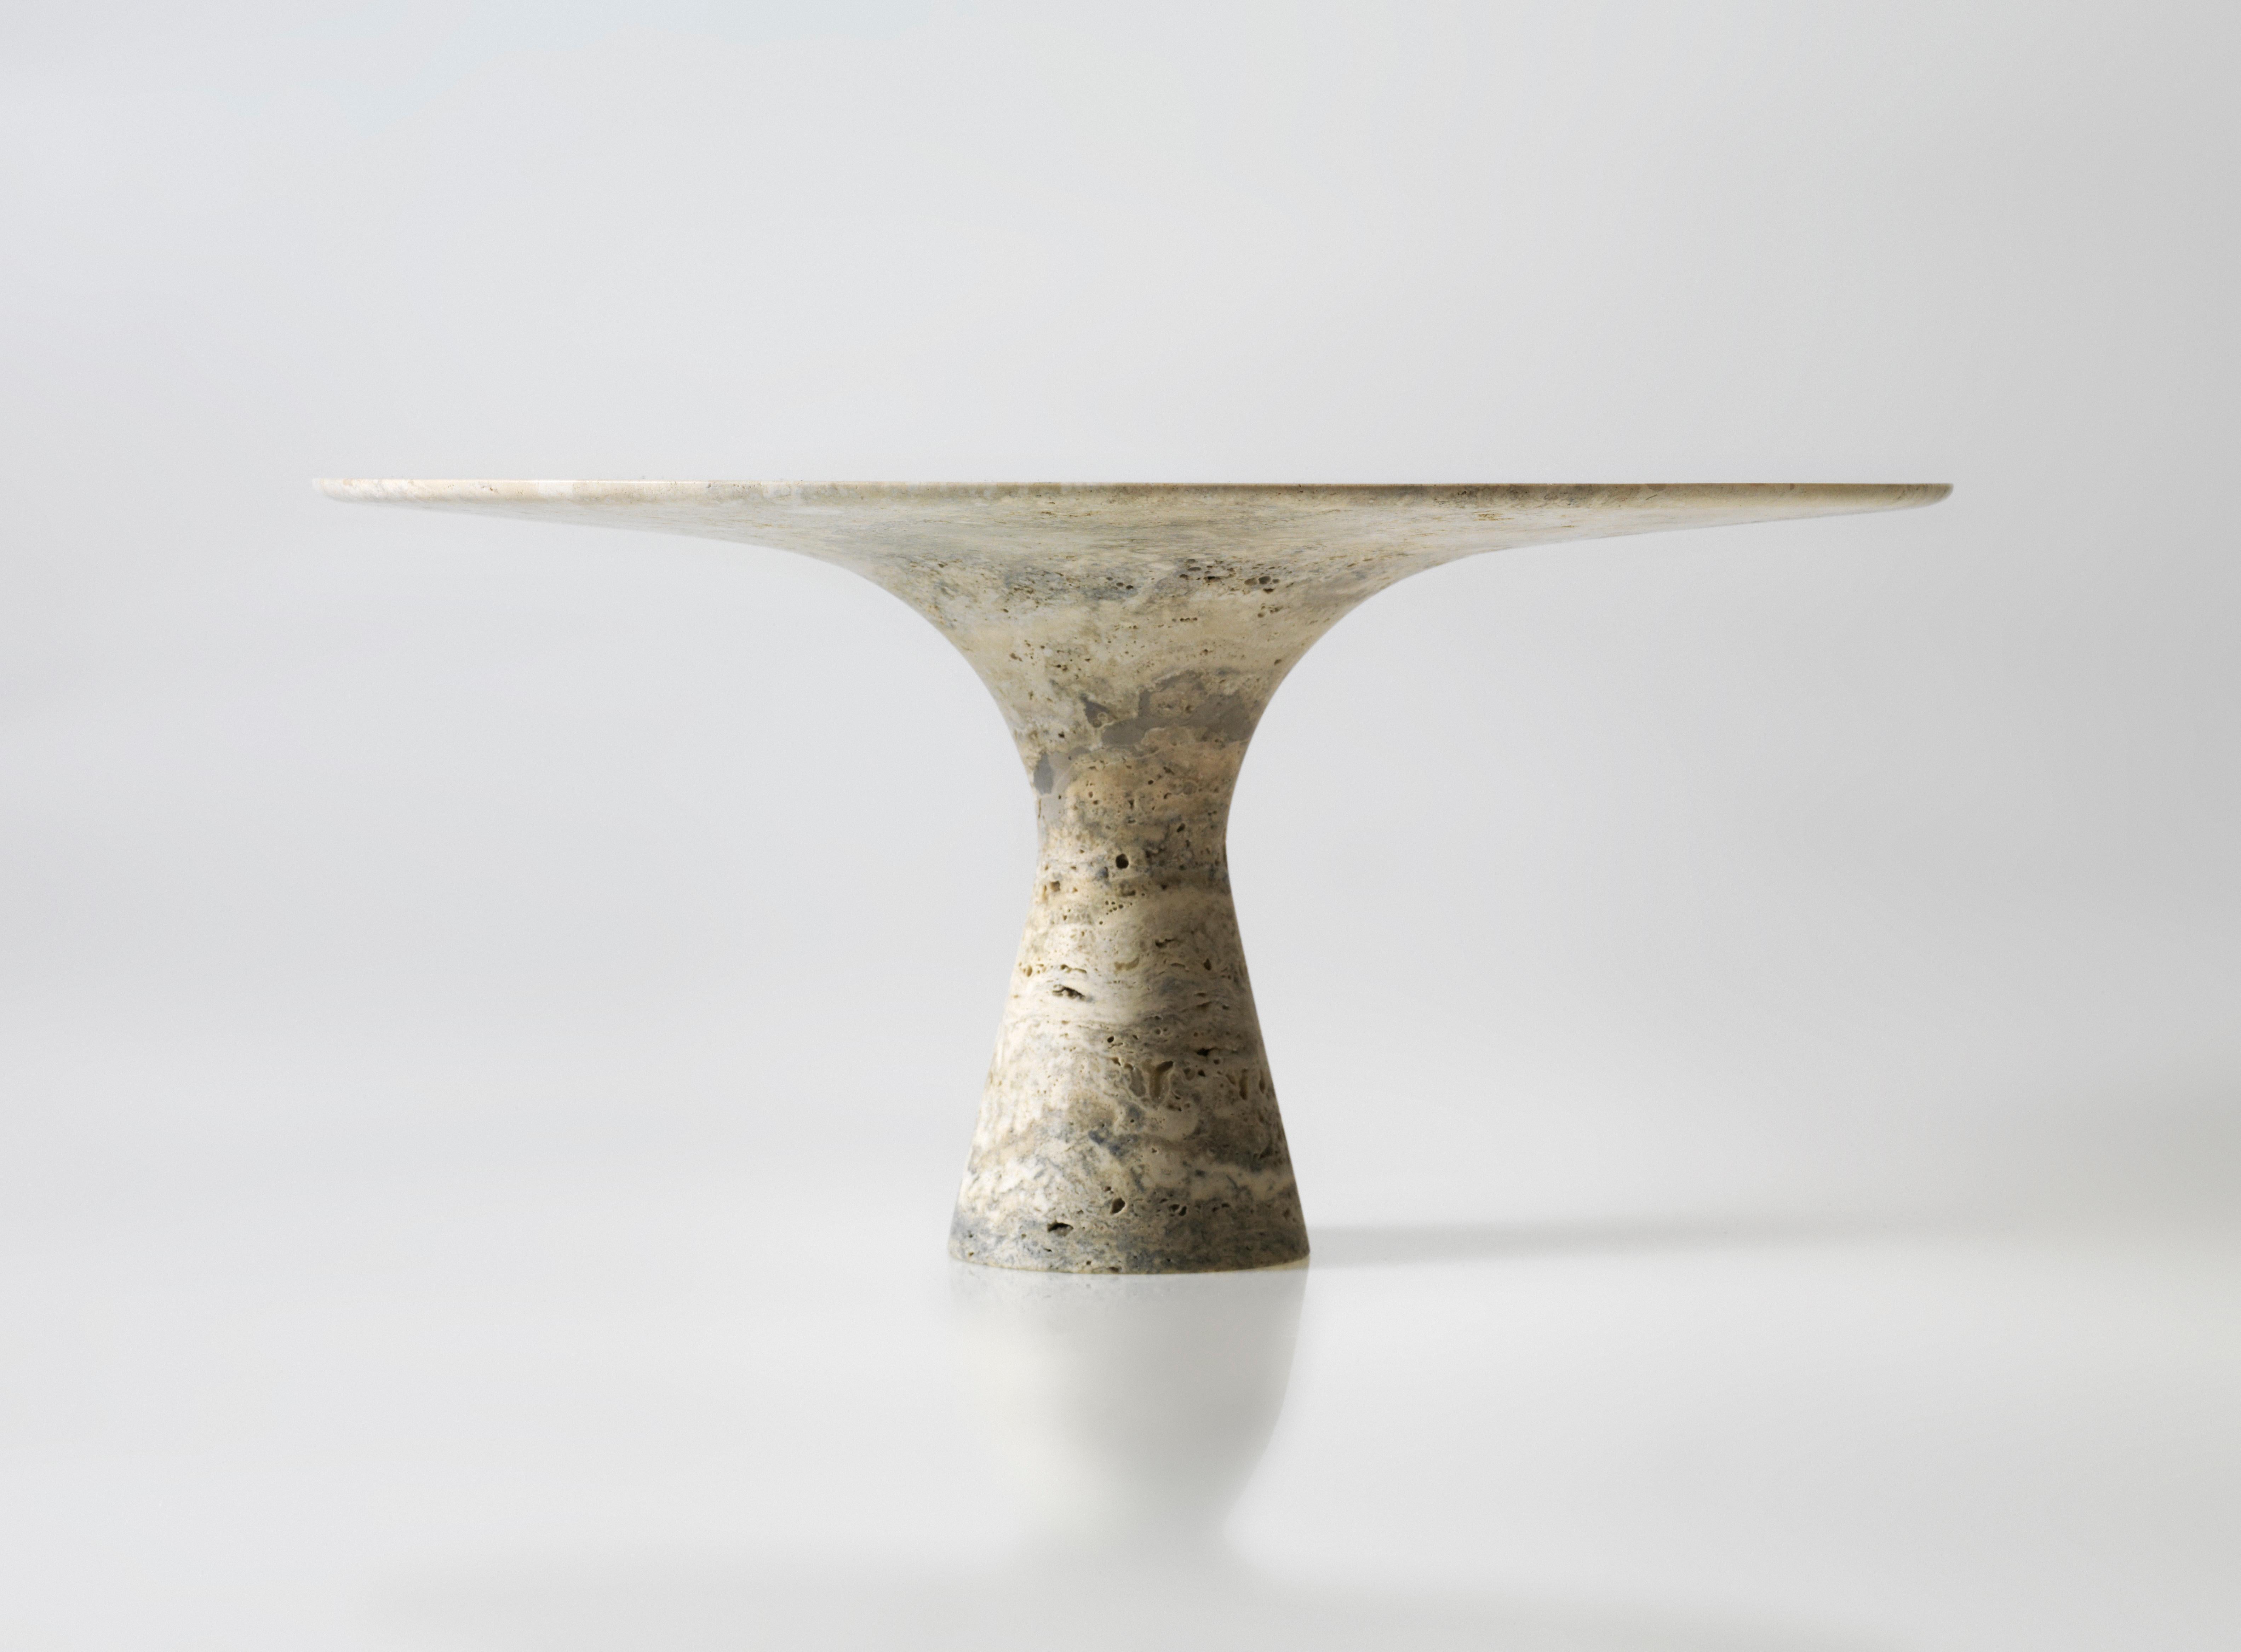 Travertino Silver Refined Contemporary Marble Oval Table 210/75
Dimensions: 210 x 135 x 75 cm
Materials: Travertino Silver.

Angelo is the essence of a round table in natural stone, a sculptural shape in robust material with elegant lines and